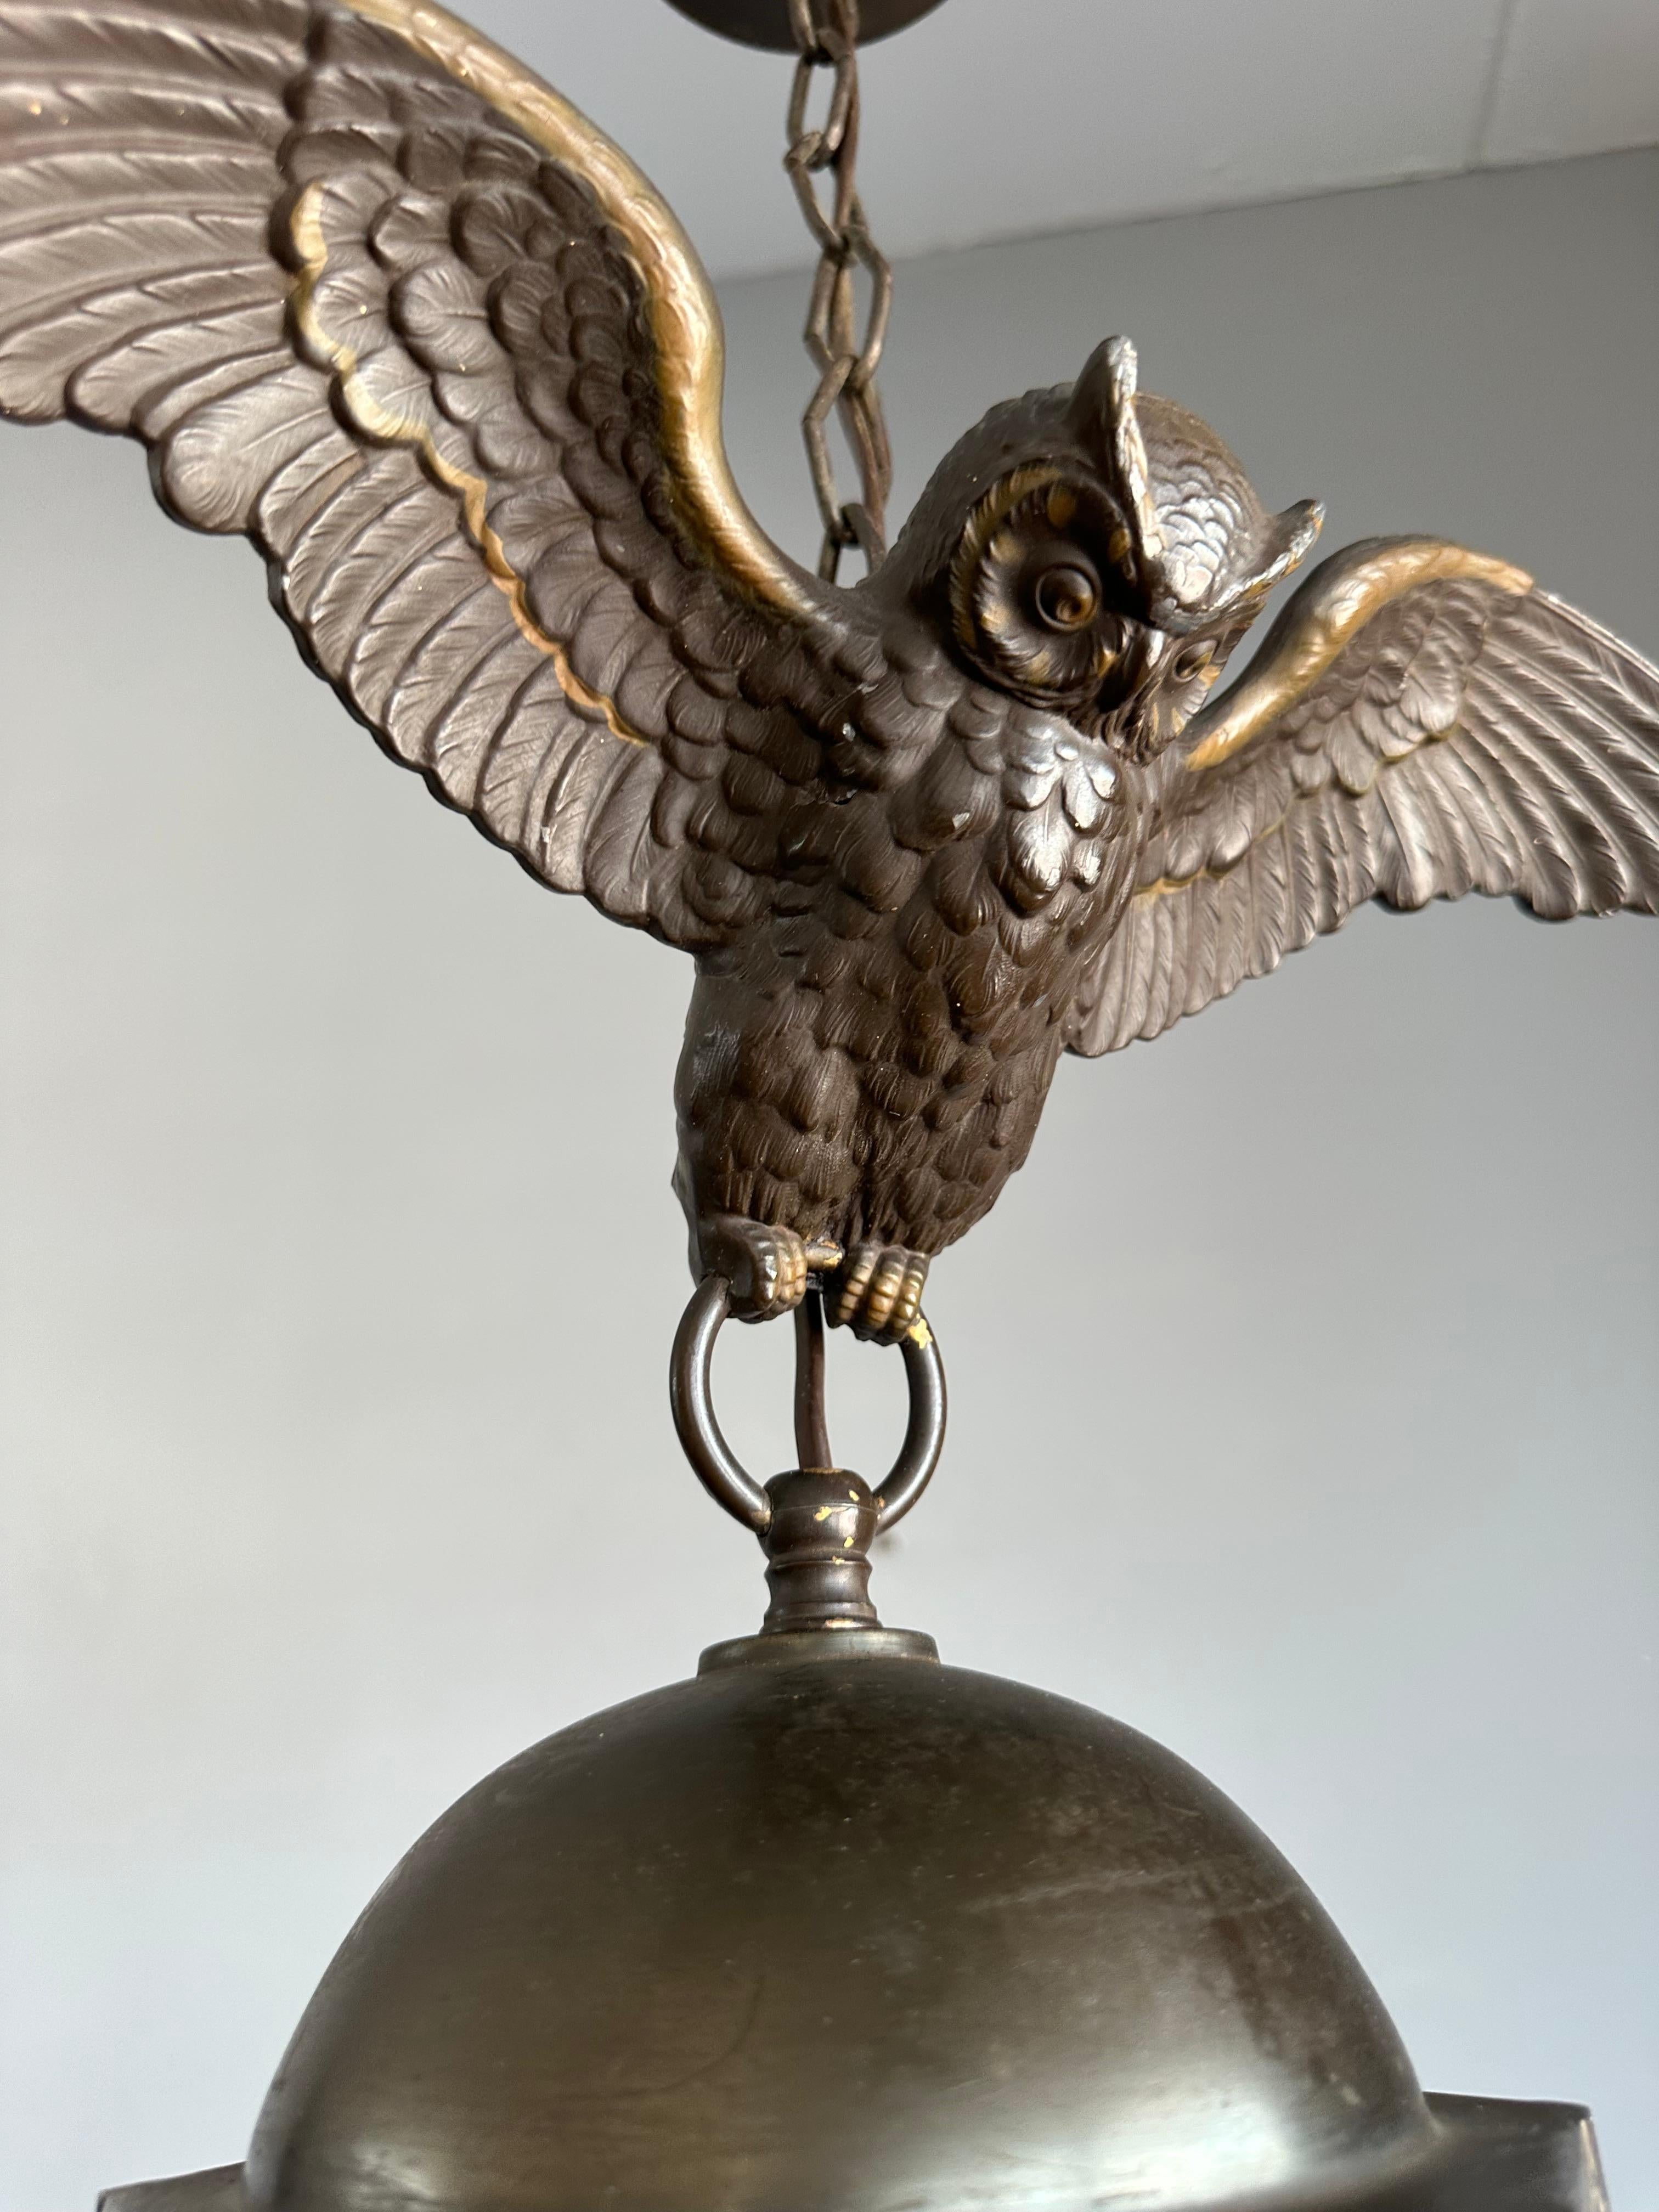 Arts and Crafts Era Flying Owl Sculpture Pendant Light or Lantern with Cut Glass For Sale 13